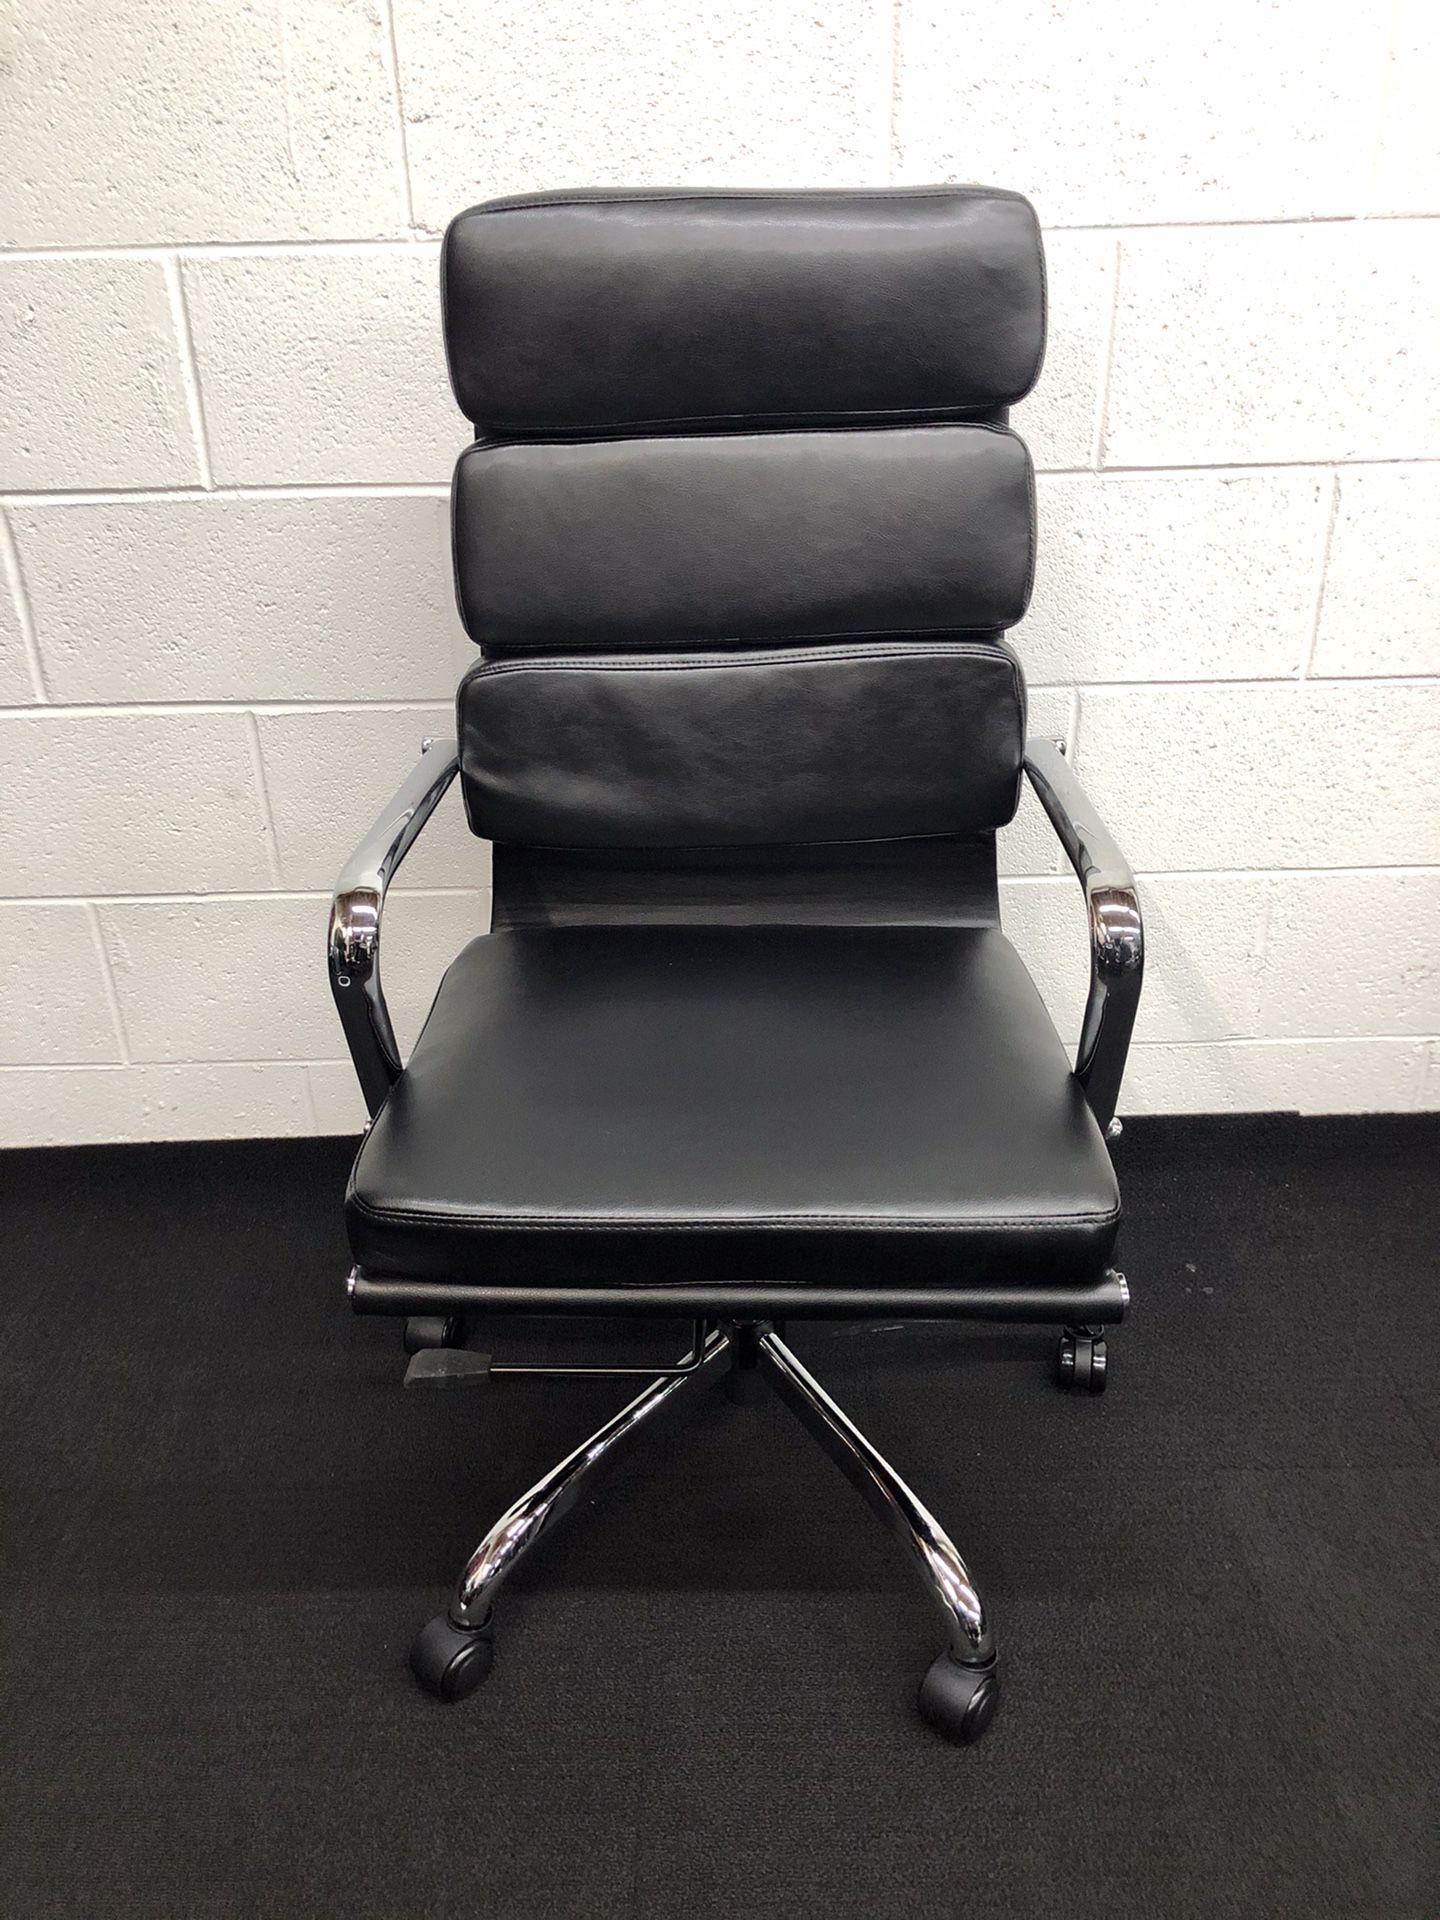 BRAND NEW BLACK/CHROME ADJUSTABLE MANAGERS OFFICE CHAIR